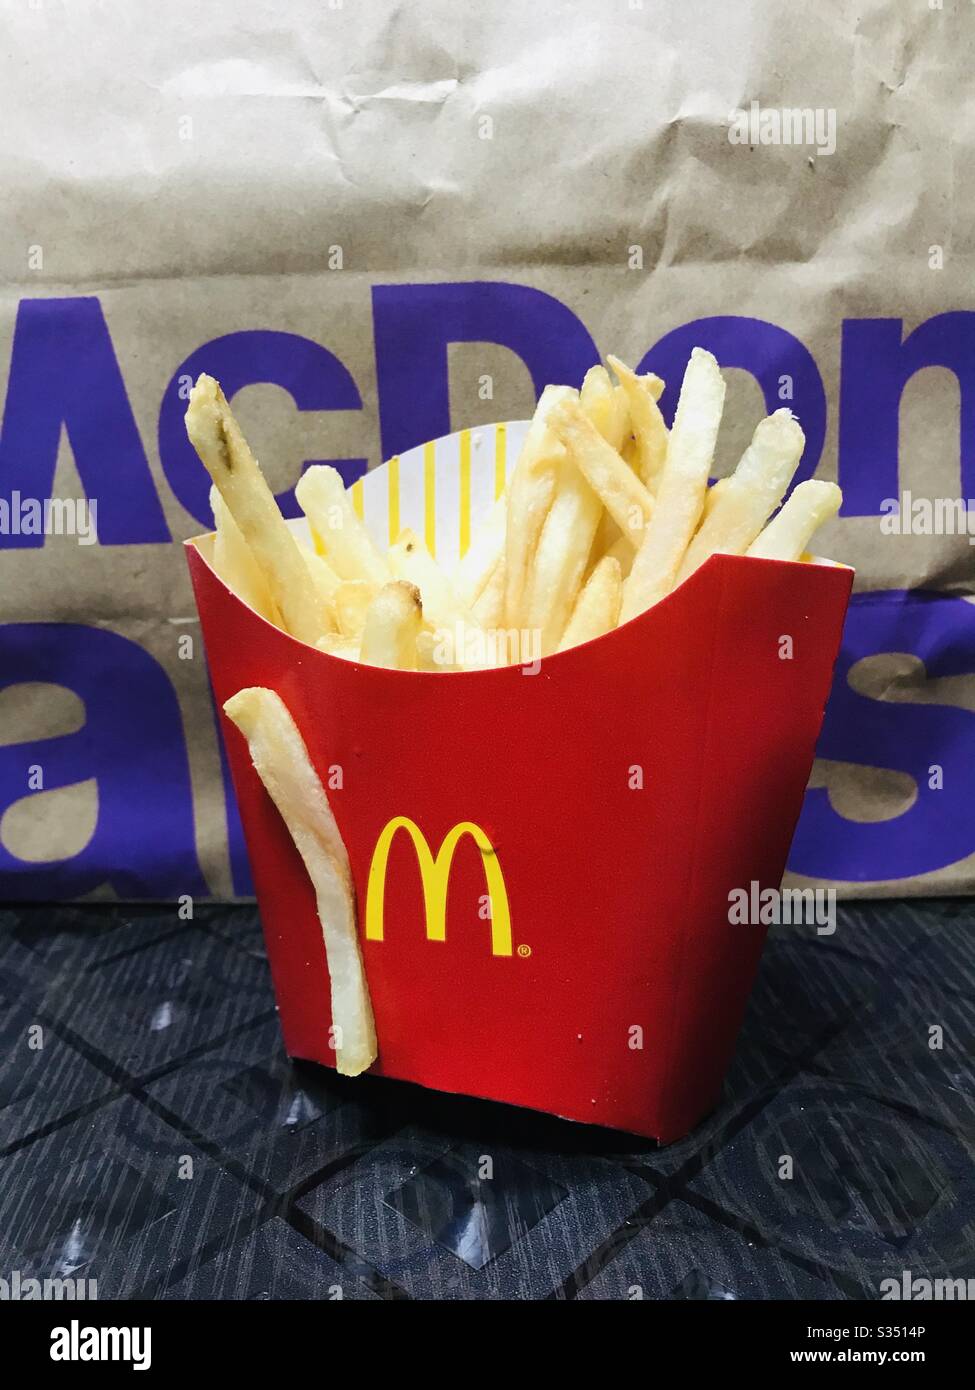 A portion of McDonald’s French fries on a McD paper bag background - a single fries stick outside on the box, quickly took a snap.. yummy junk food ever, fast food quick snack anytime anywhere, Stock Photo